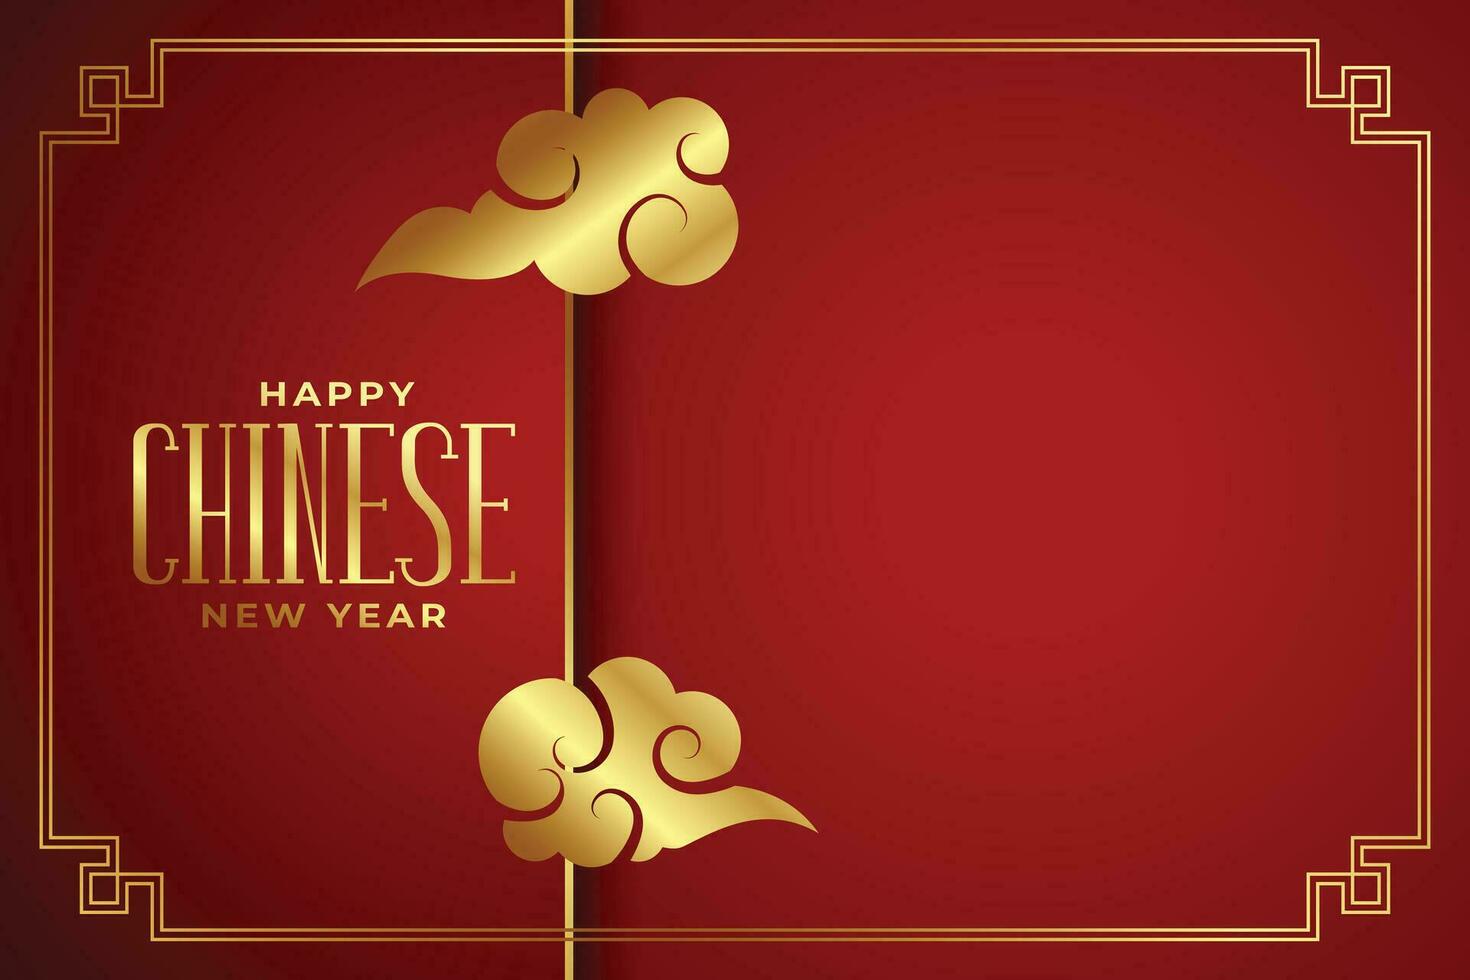 Happy chinese new year with cloud on red background vector